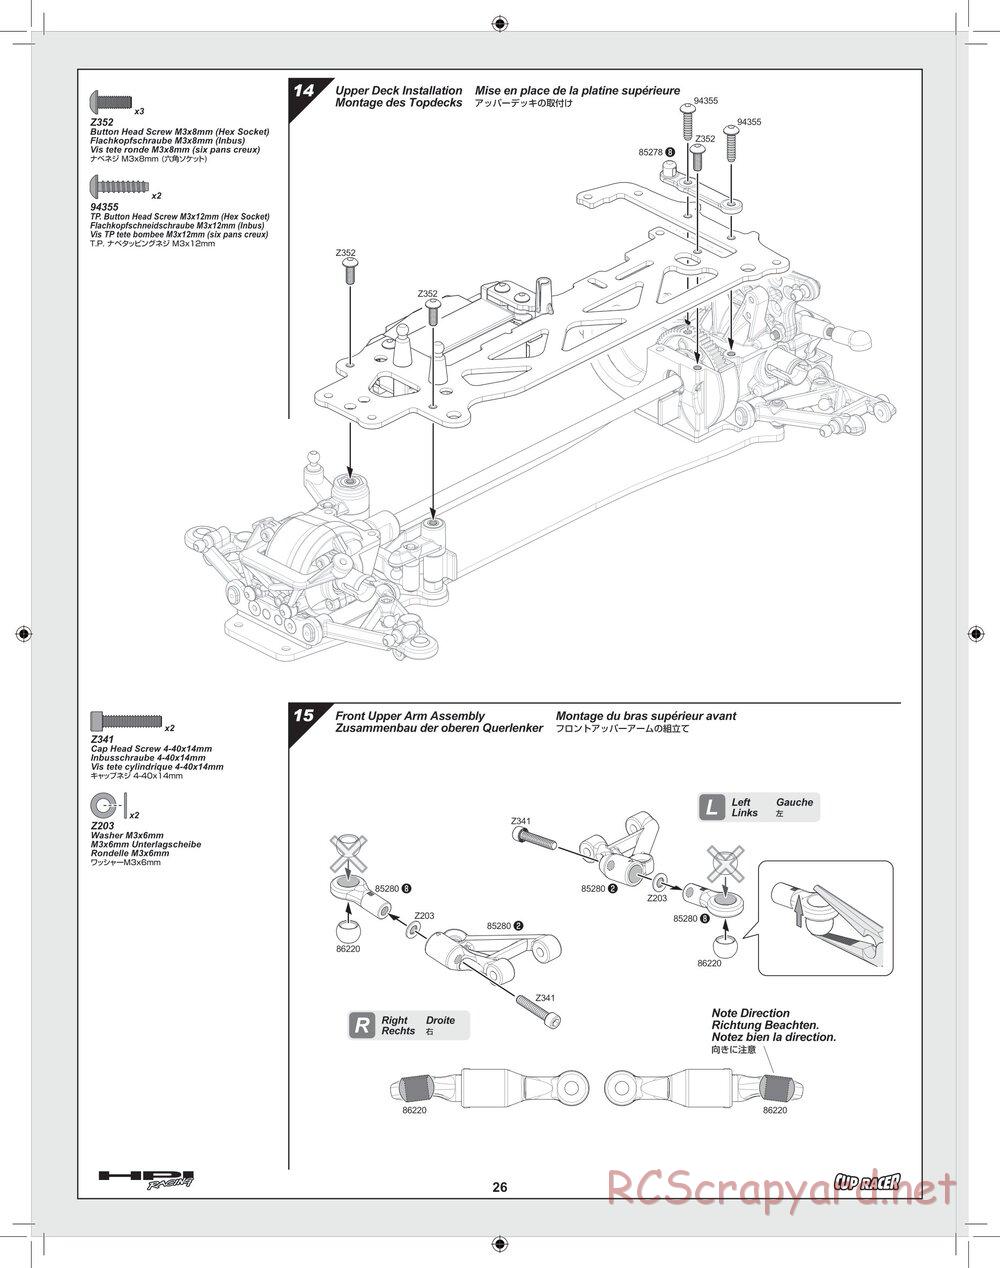 HPI - Cup Racer - Manual - Page 26